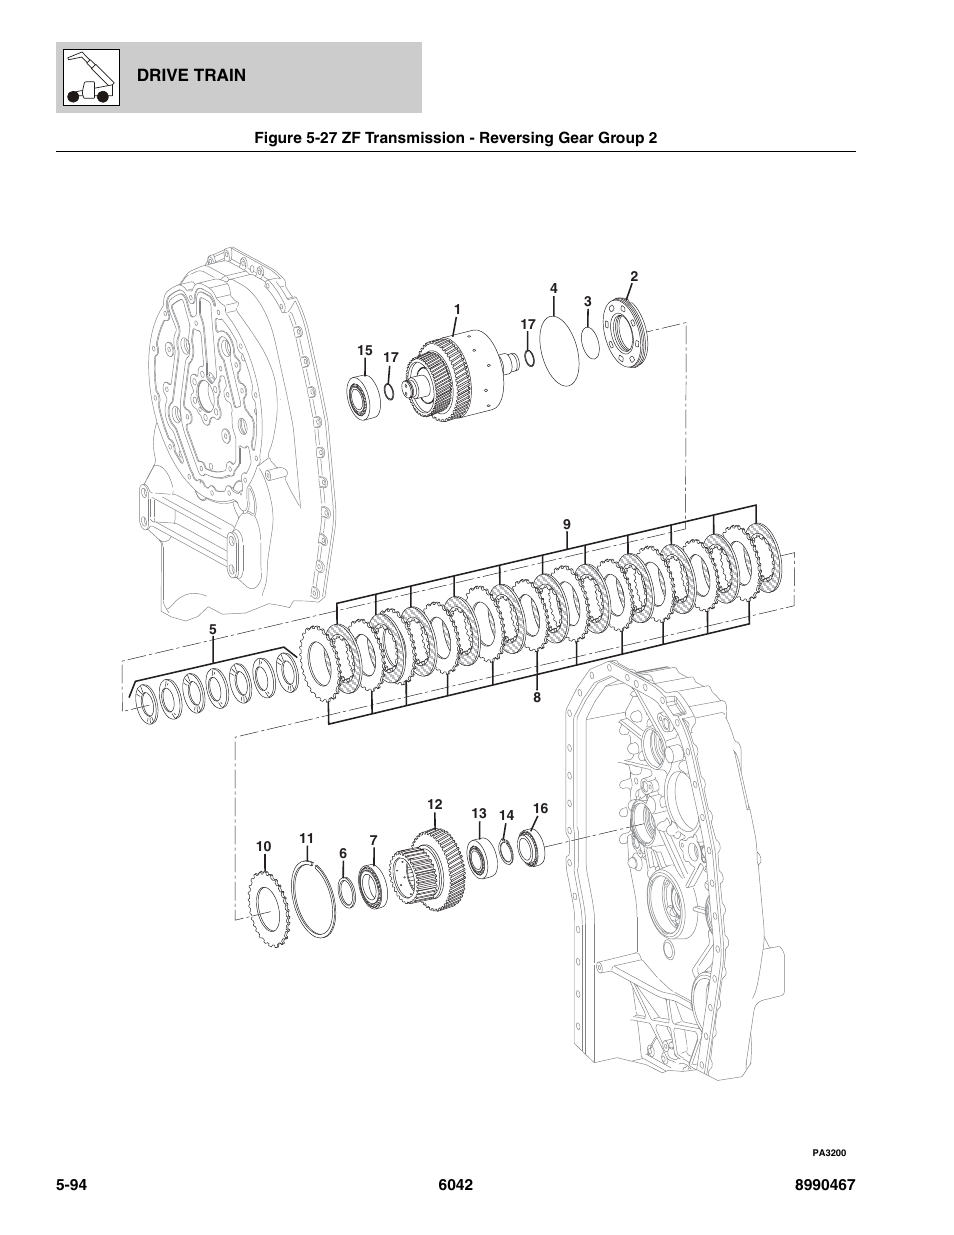 Zf transmission - reversing gear group 2 -94, Oup 2, (see figure 5-27